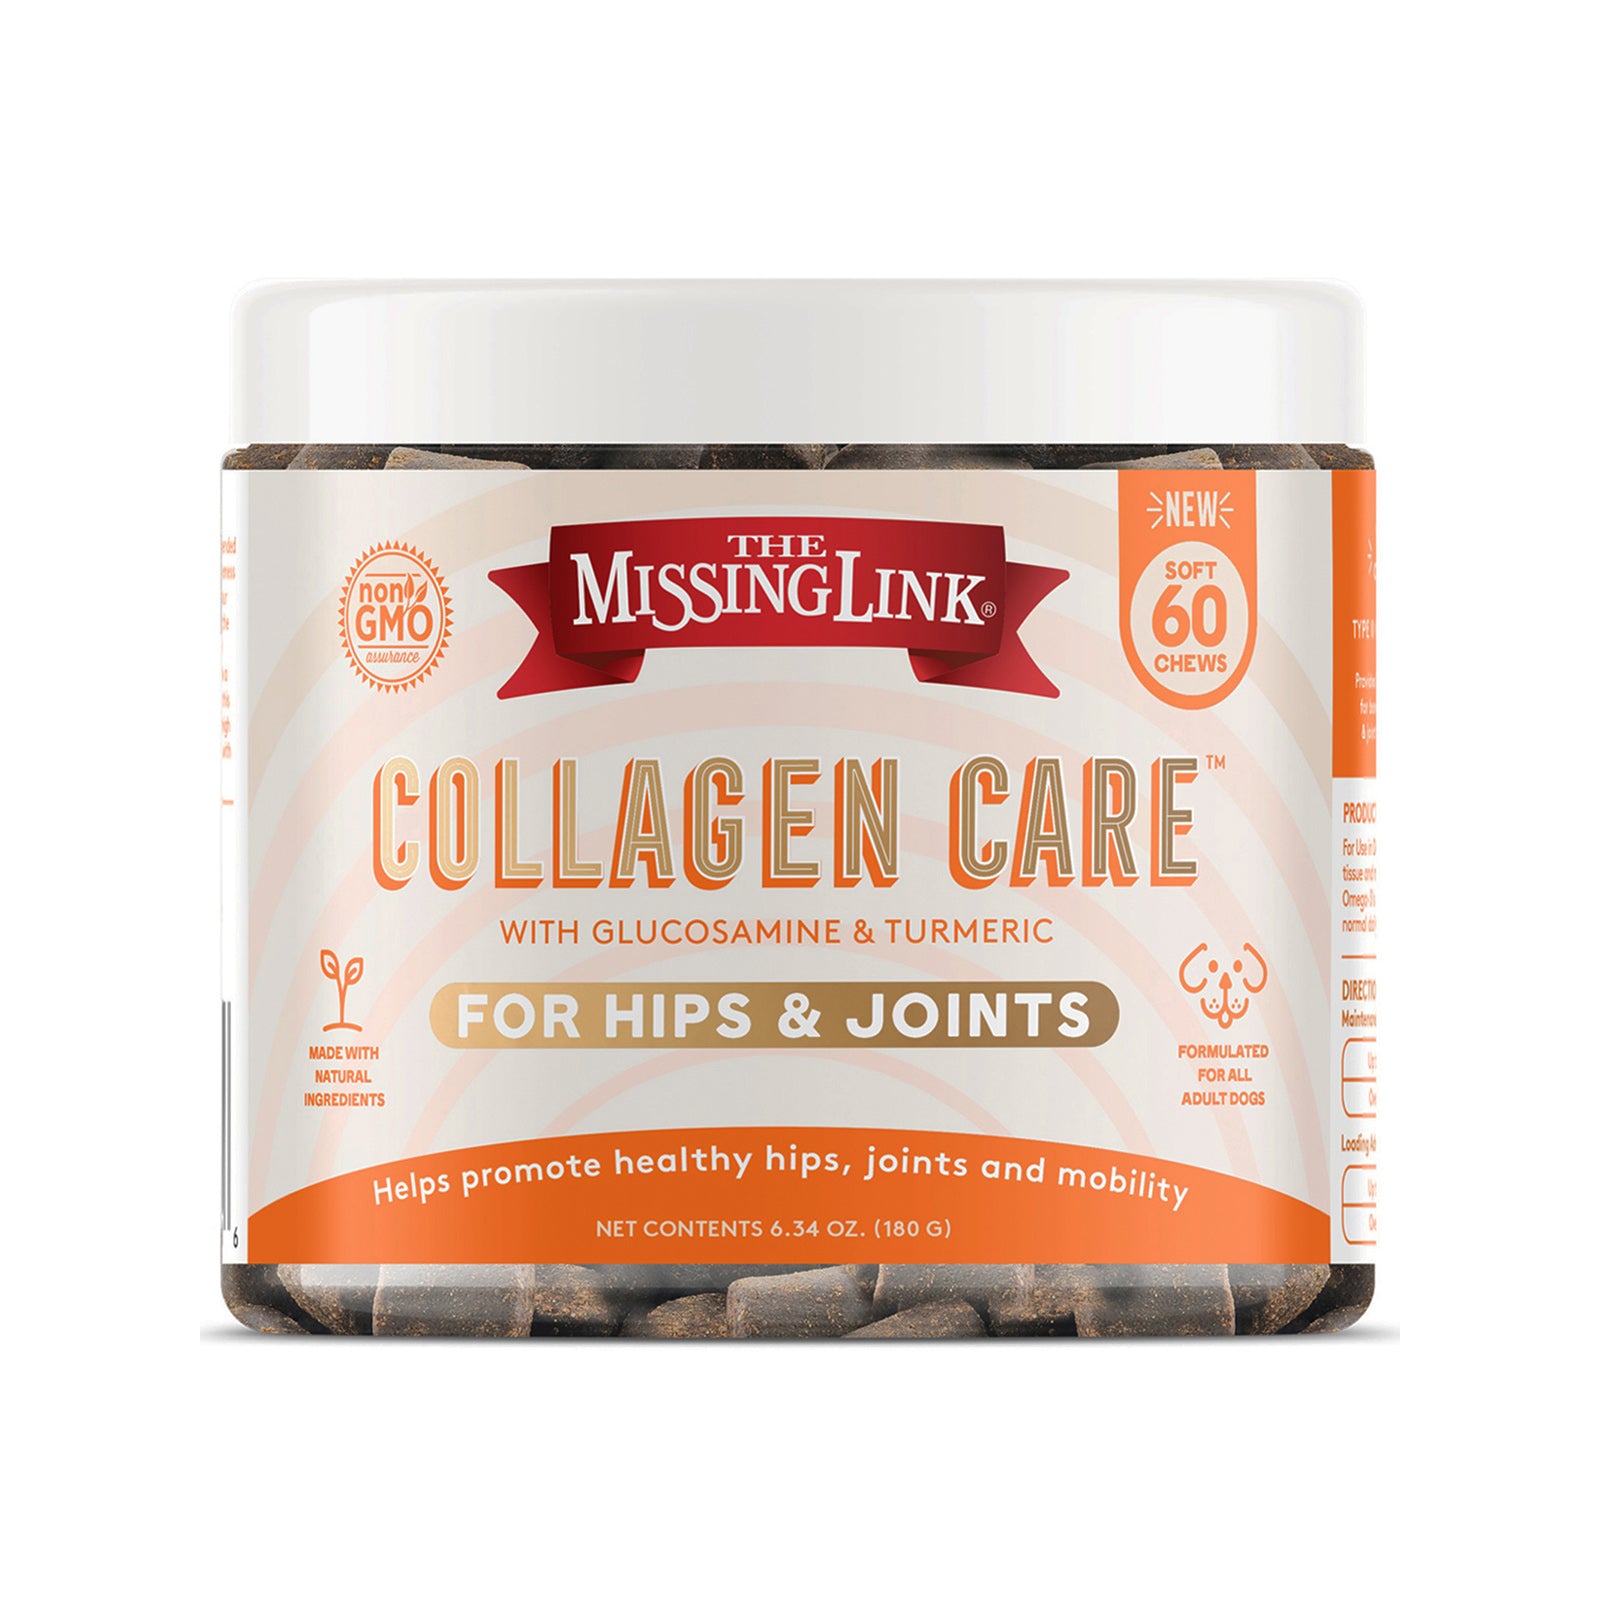 Collagen Care with Glucosamine & Turmeric for hips and joints.